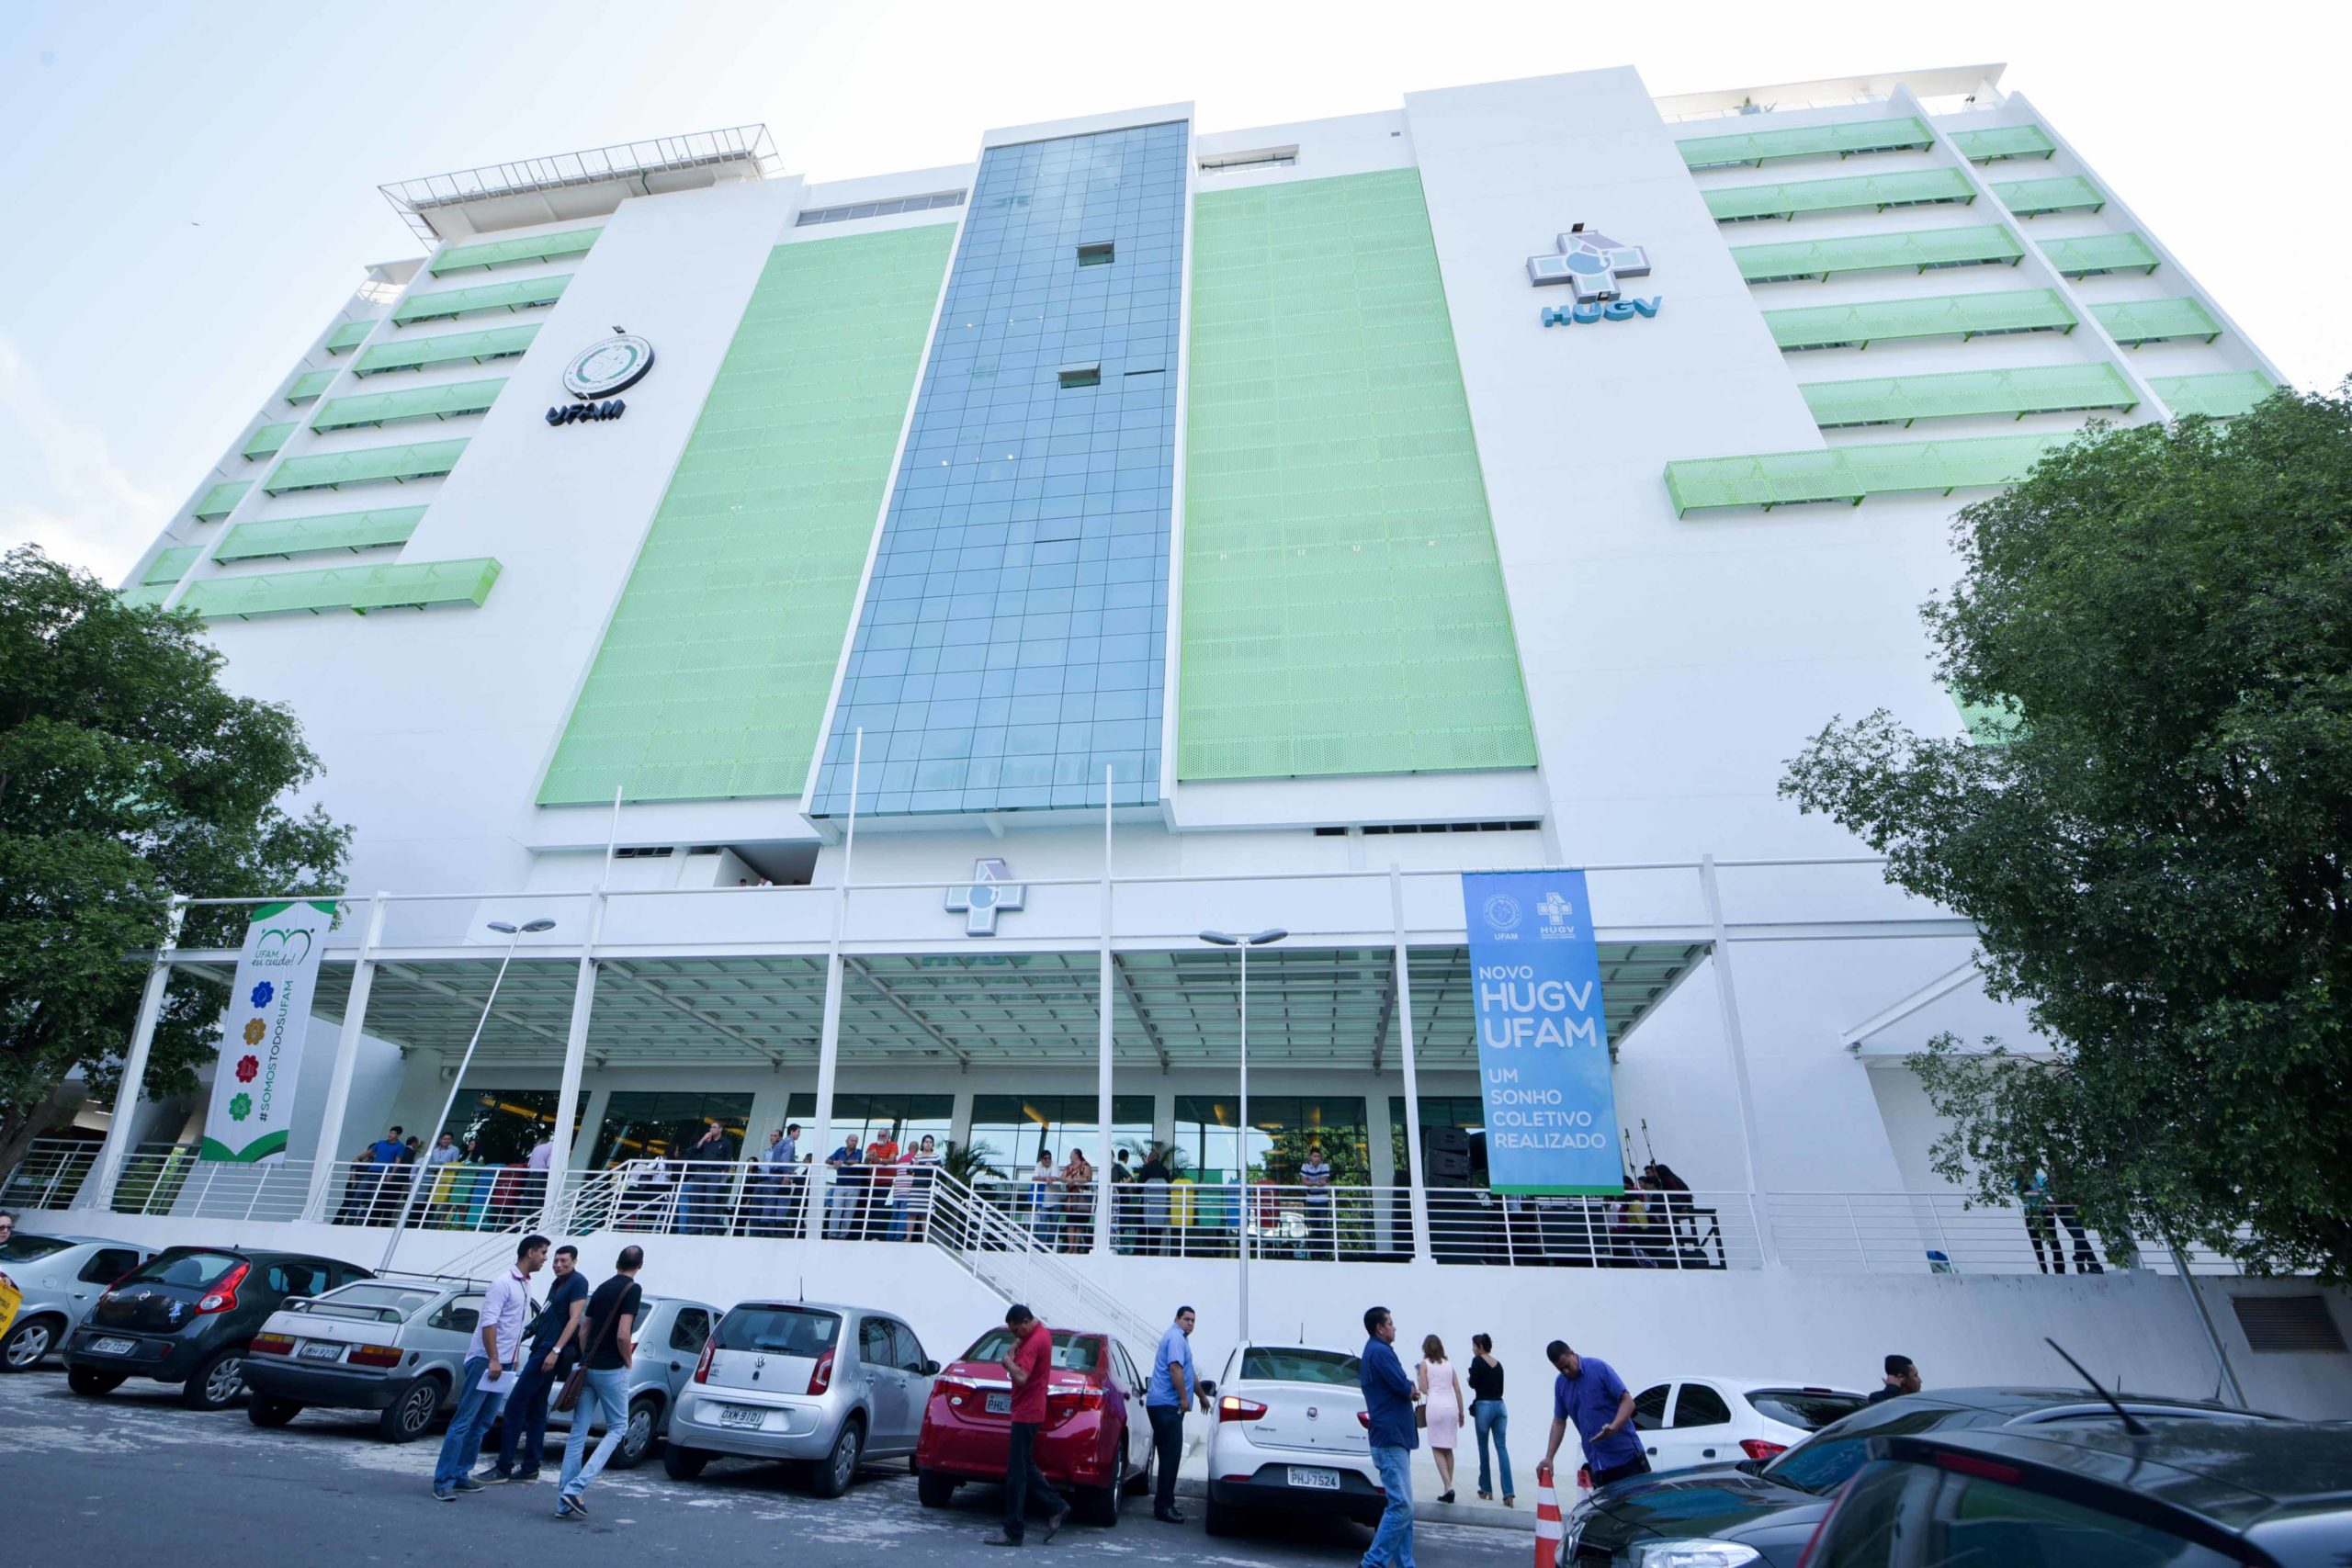 The Getúlio Vargas University Hospital, linked to the Federal University of Amazonas (UFAM), was left approximately four hours without the supply this Thursday morning, which caused distress among professionals, according to a doctor at the facility who chose to remain anonymous.